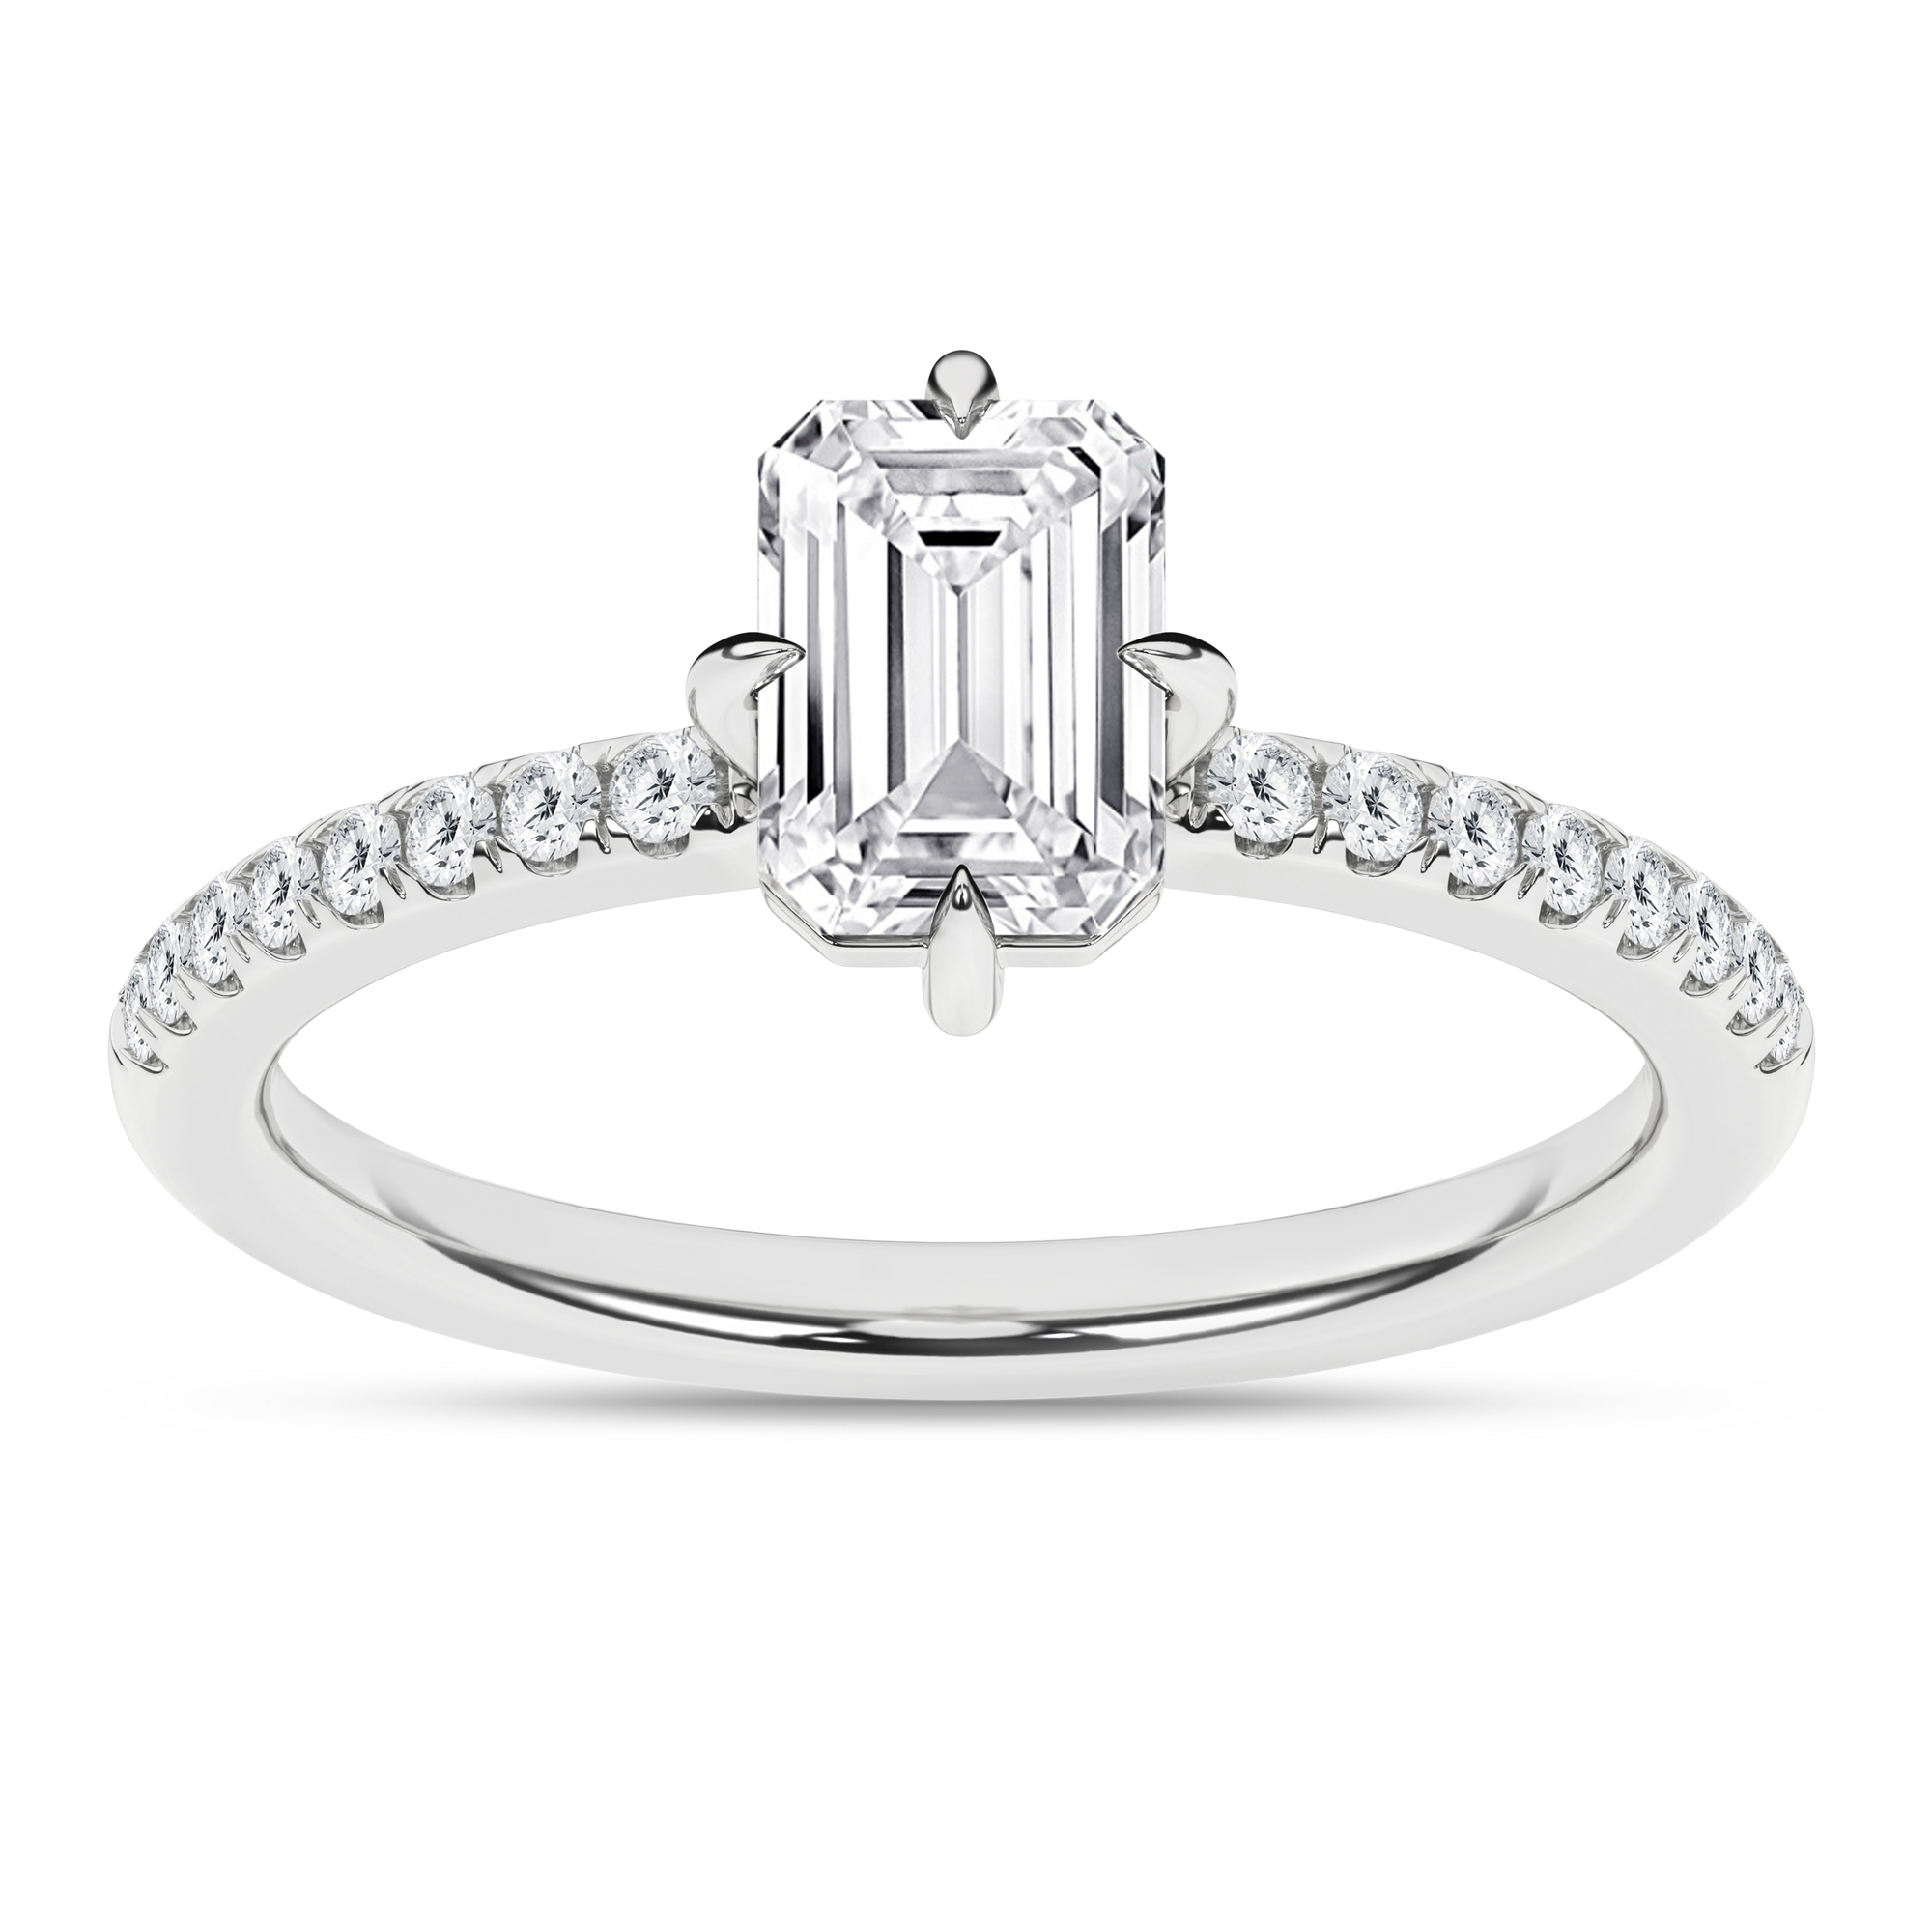 1.16ct. Diamond East West Prong Engagement Ring (Emerald)